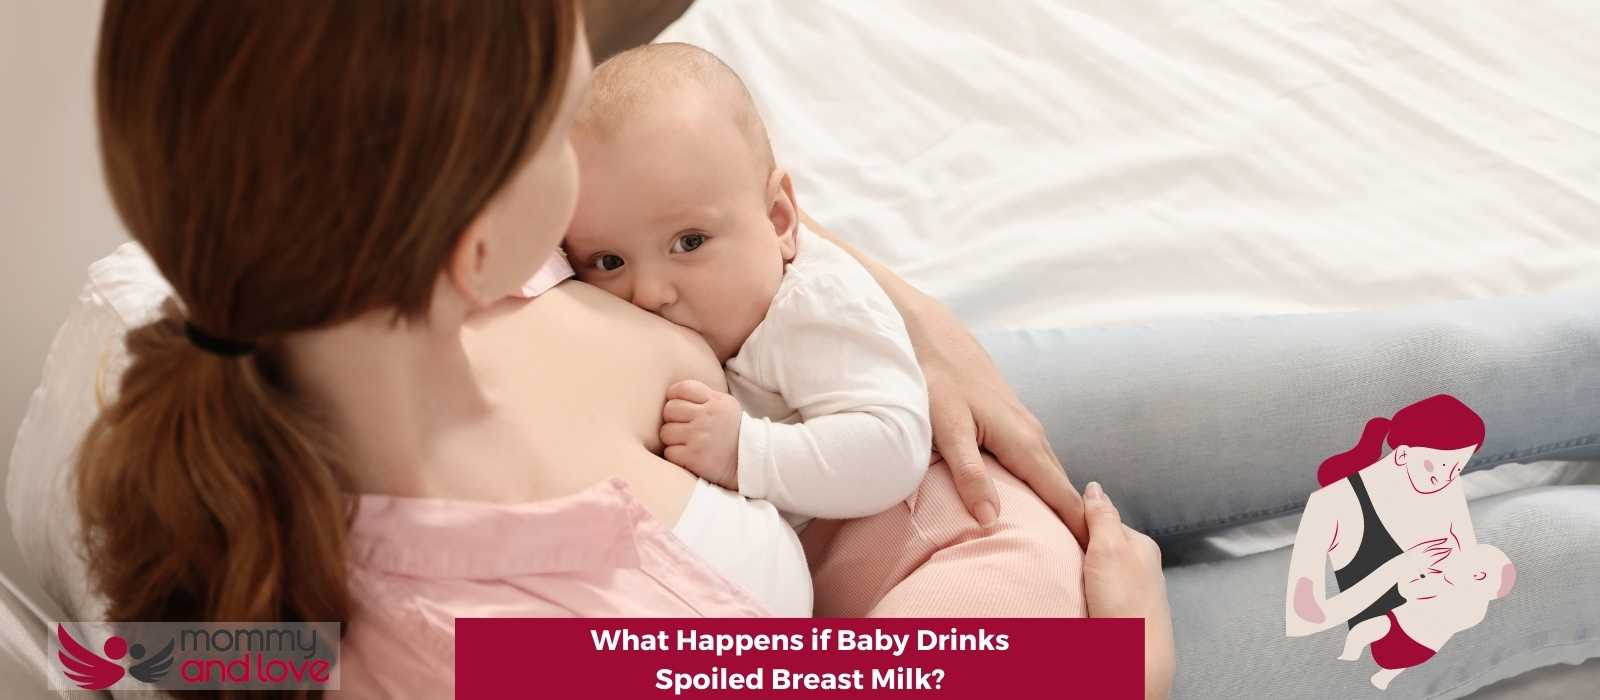 What Happens if Baby Drinks Spoiled Breast Milk